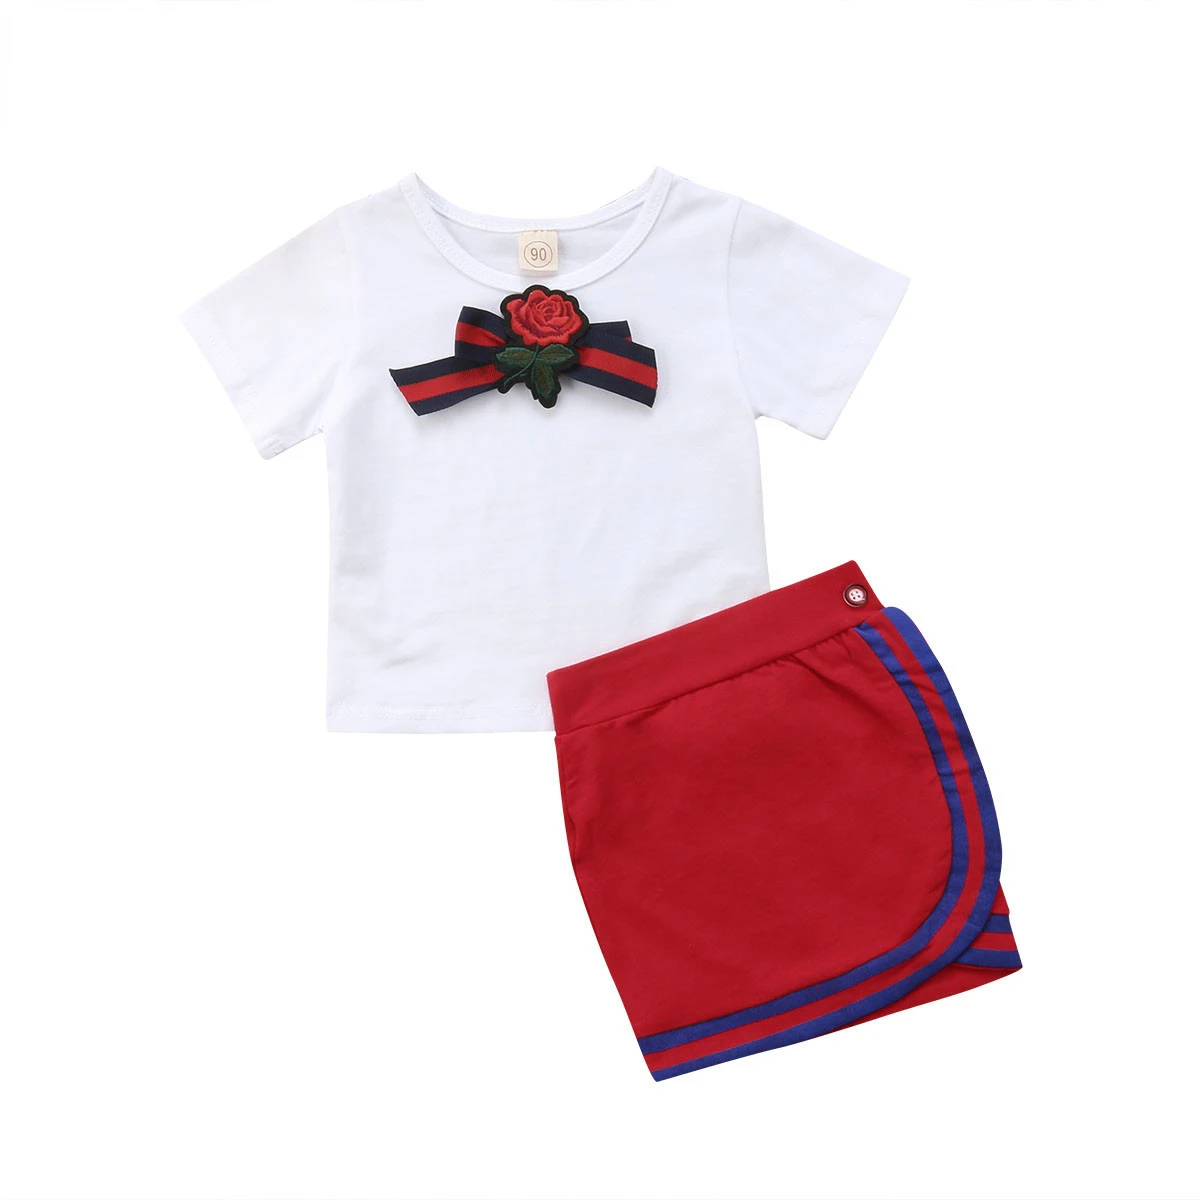 Red Mini Pencil Skirts Brand New 1-5Y Summer Toddler Baby Girl Clothes Sets Floral Embroidery White Cotton T-Shirts Tops Kids enlarge